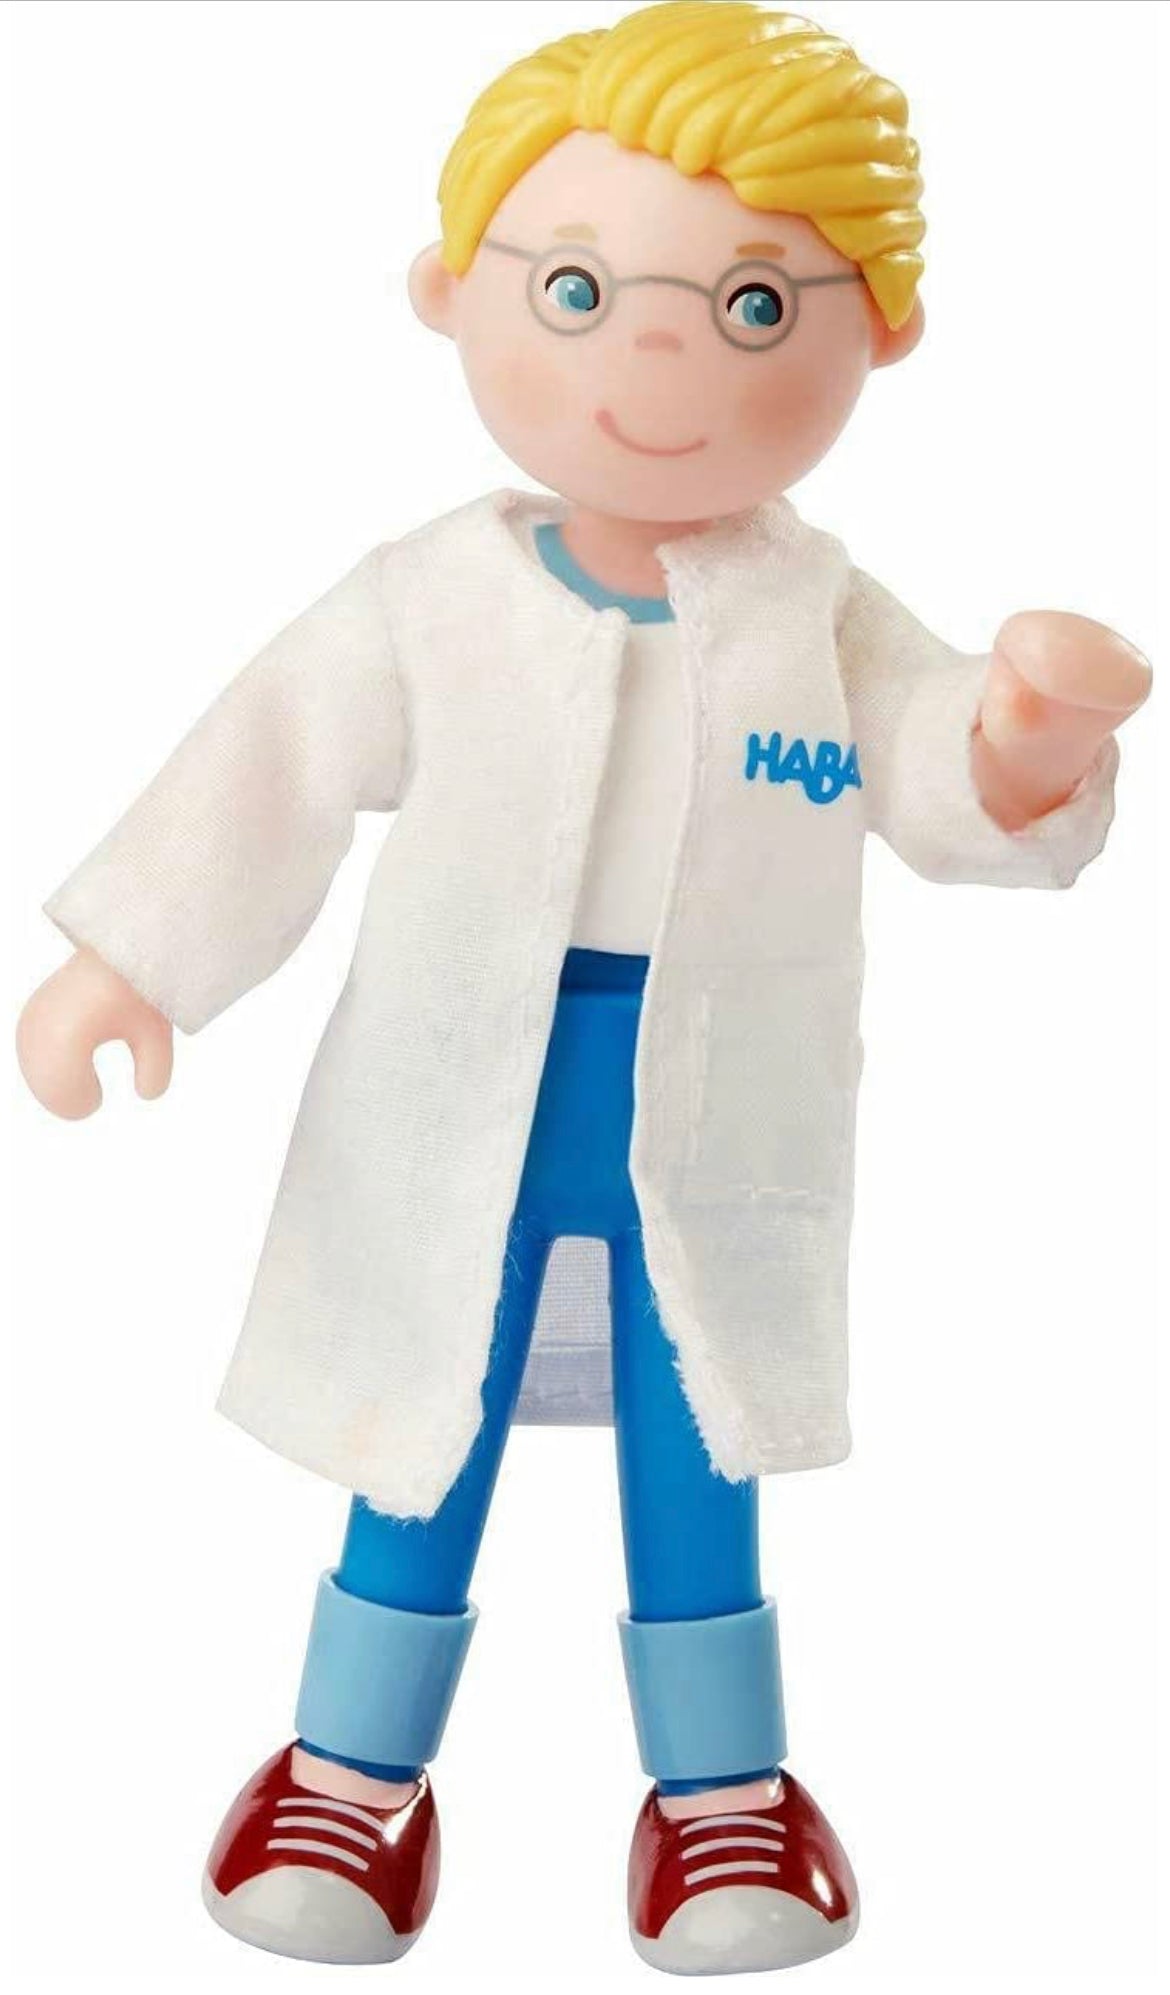 HABA Little Friends Dad Andreas 4.5" Dollhouse Toy Figure with Removable